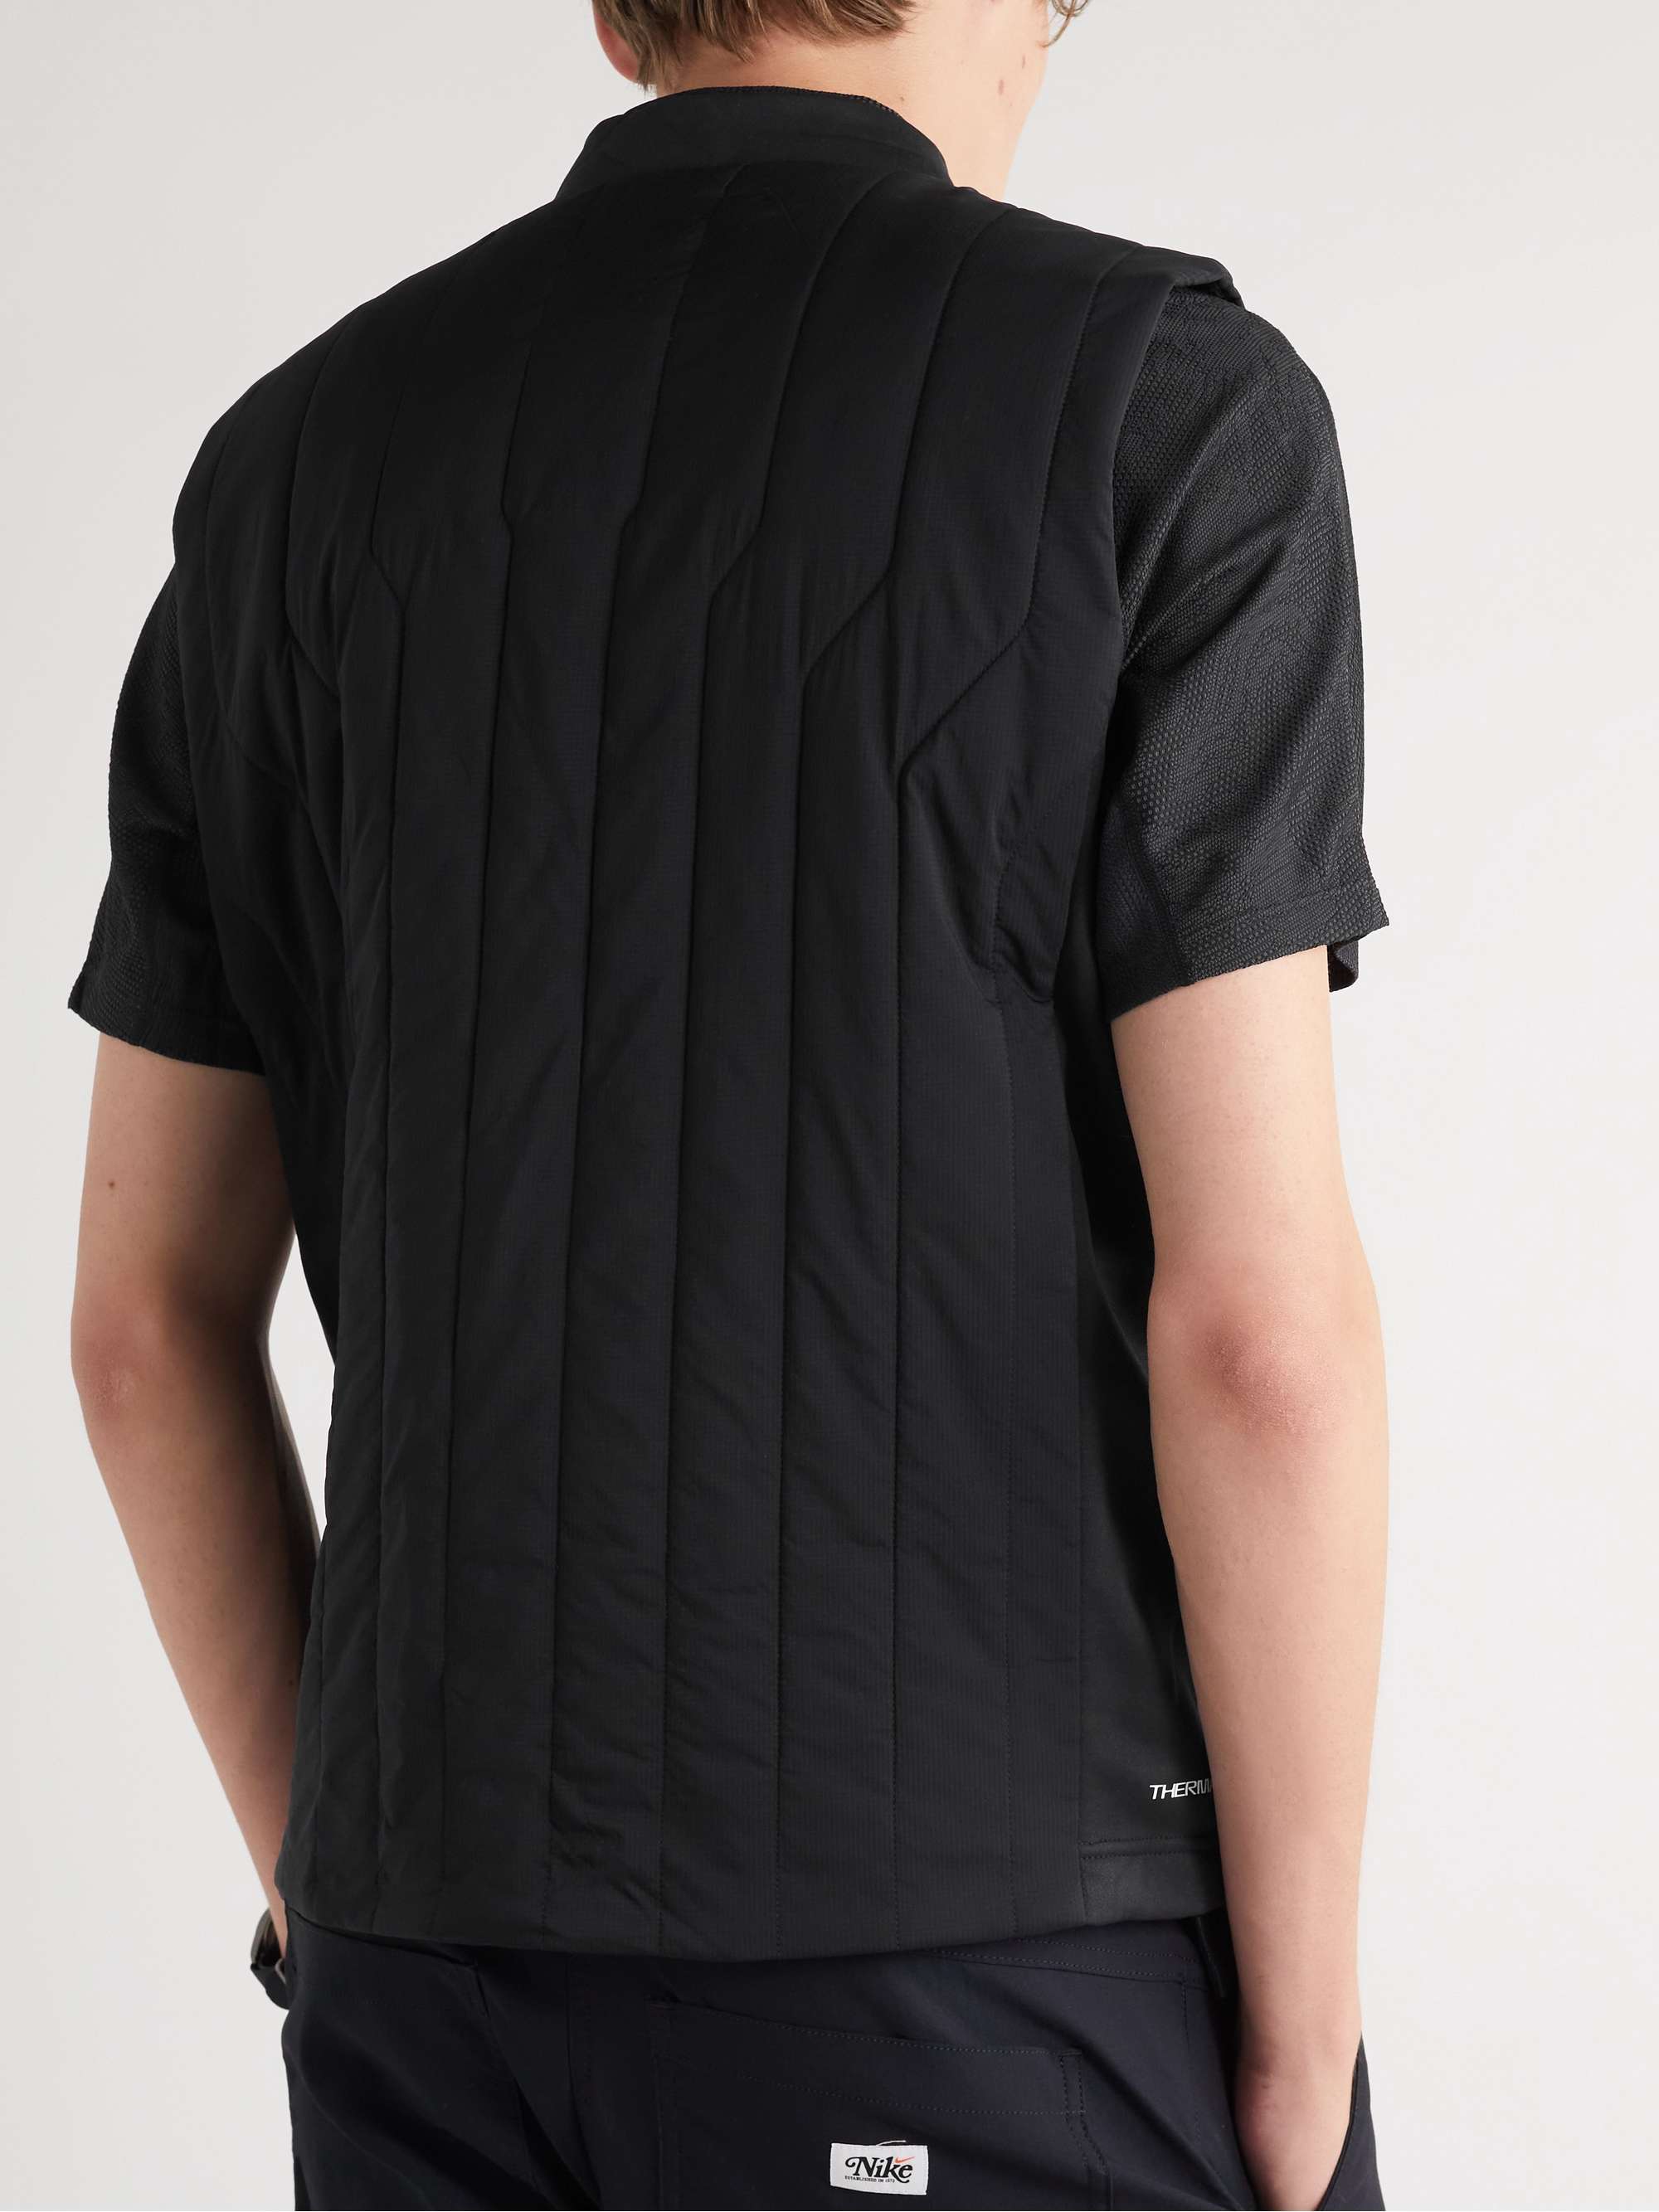 NIKE GOLF Quilted Therma-FIT ADV Golf Gilet | MR PORTER